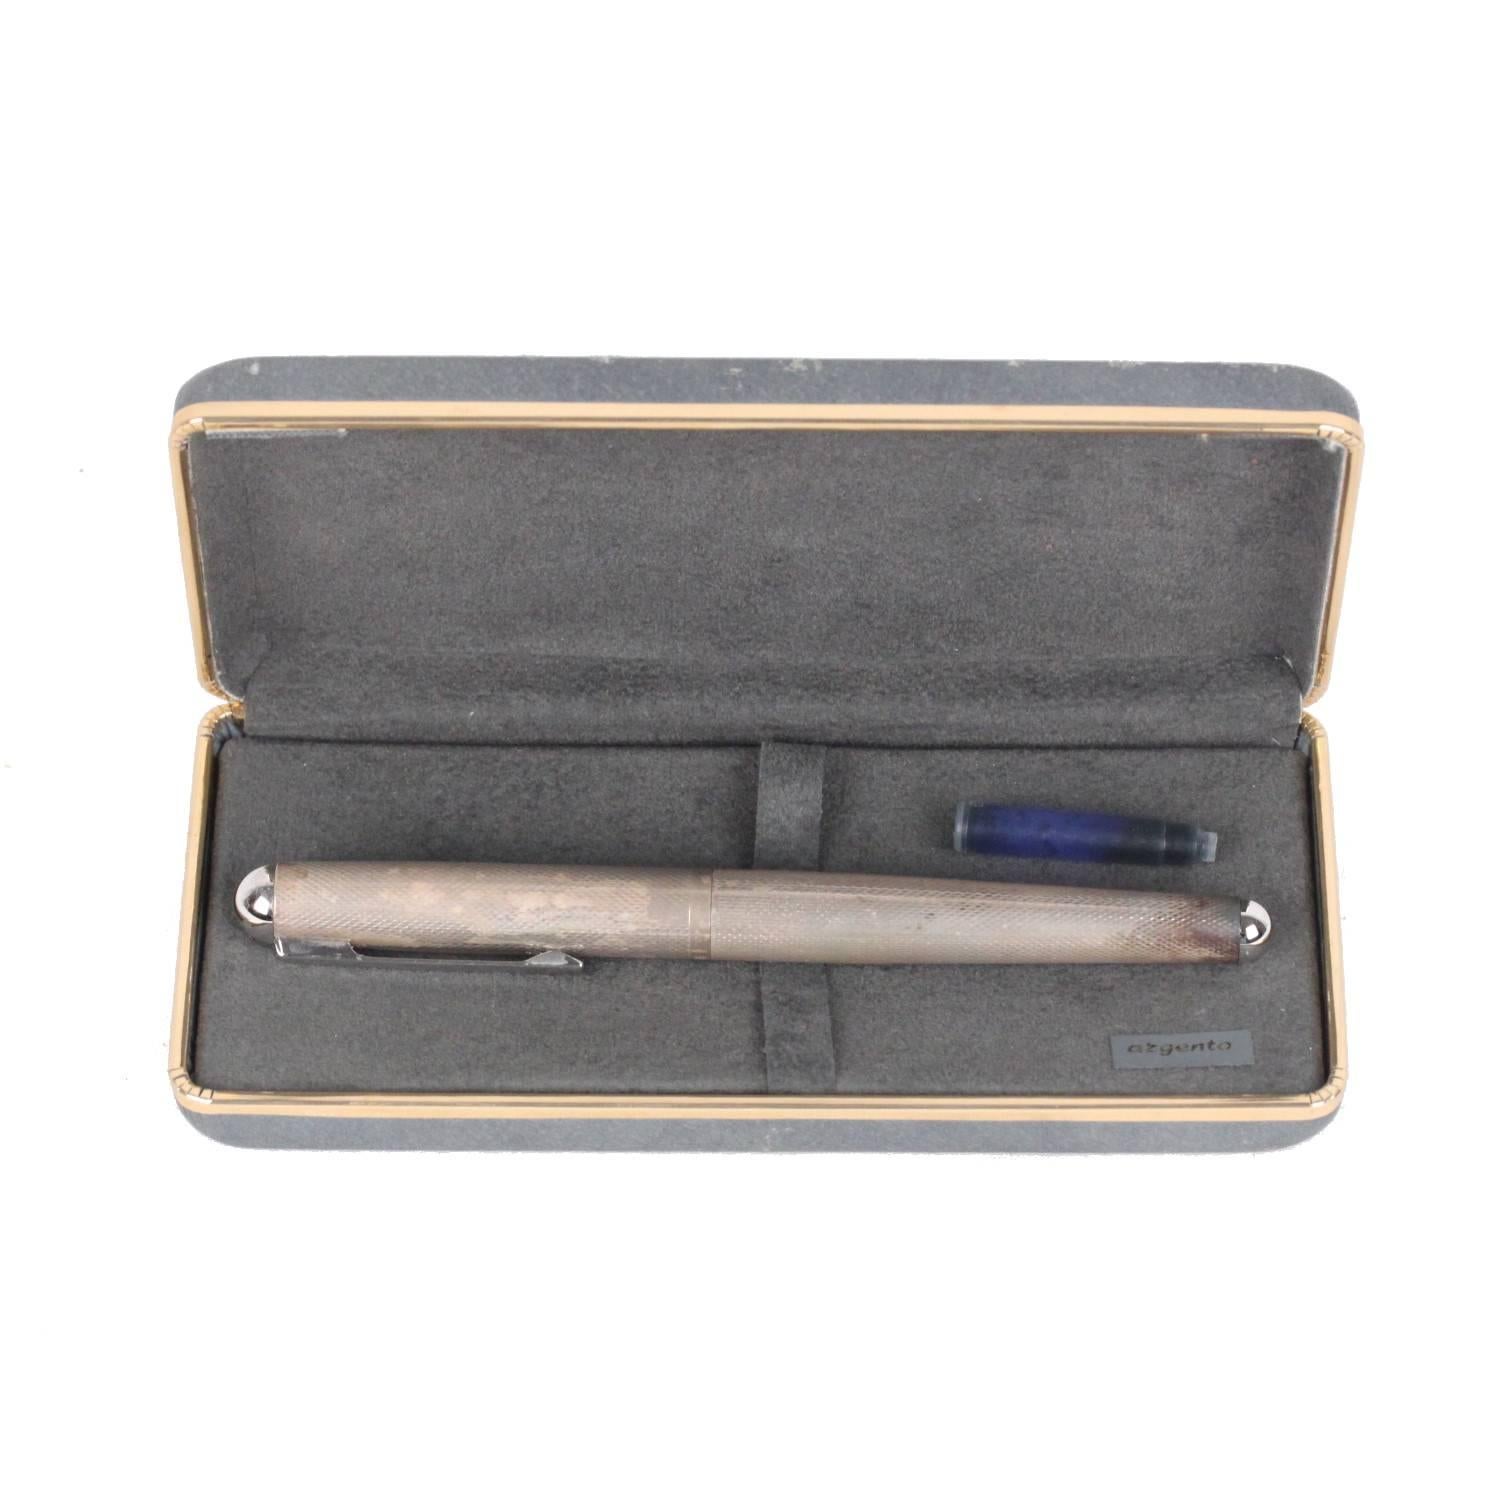 
- Cigar-shaped form
- Crafted in sterling silver (925 hallmark is engraved on the cap)
- Chrome plated trims
- Cap on/off action
- Iridium point
- Ink cartridge need to be replaced
- Original box included (with some wear of use)
- 'TAGAMET'